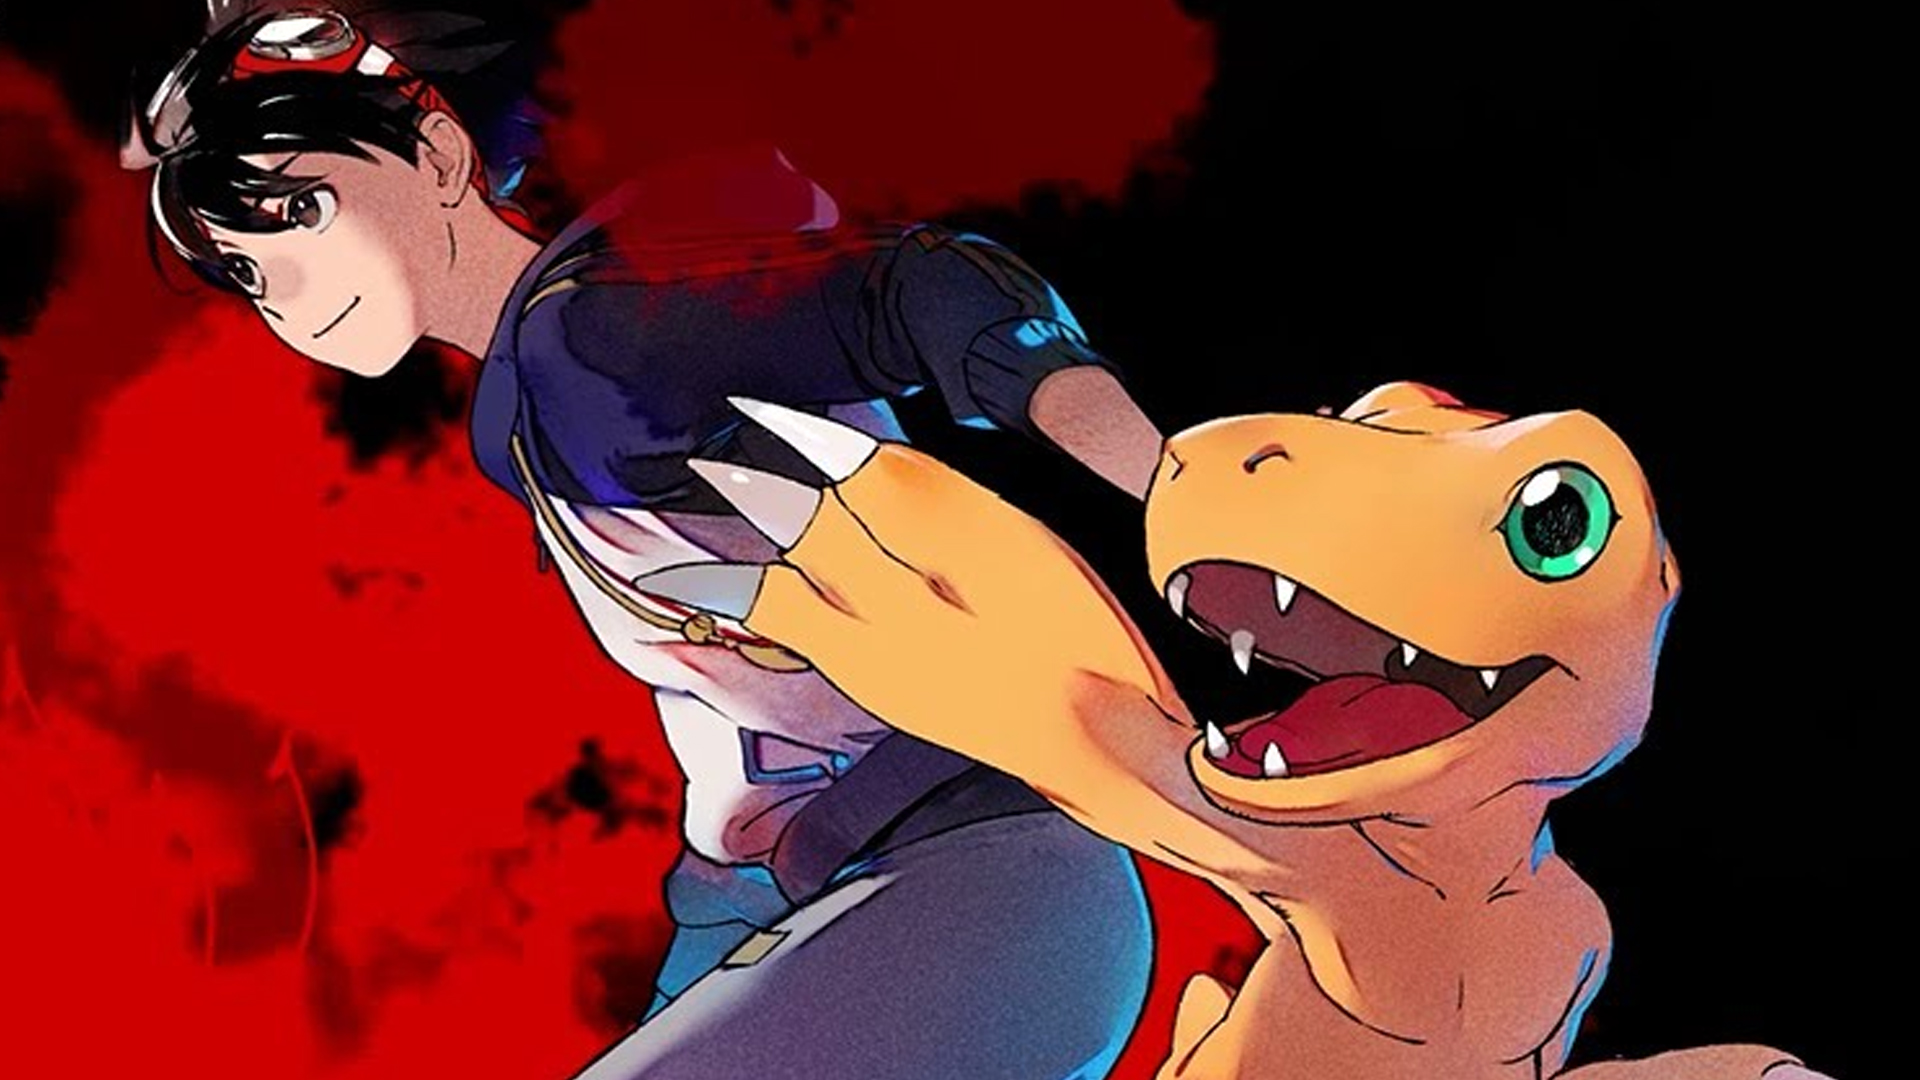 Digimon Survive Steam release date set for summer